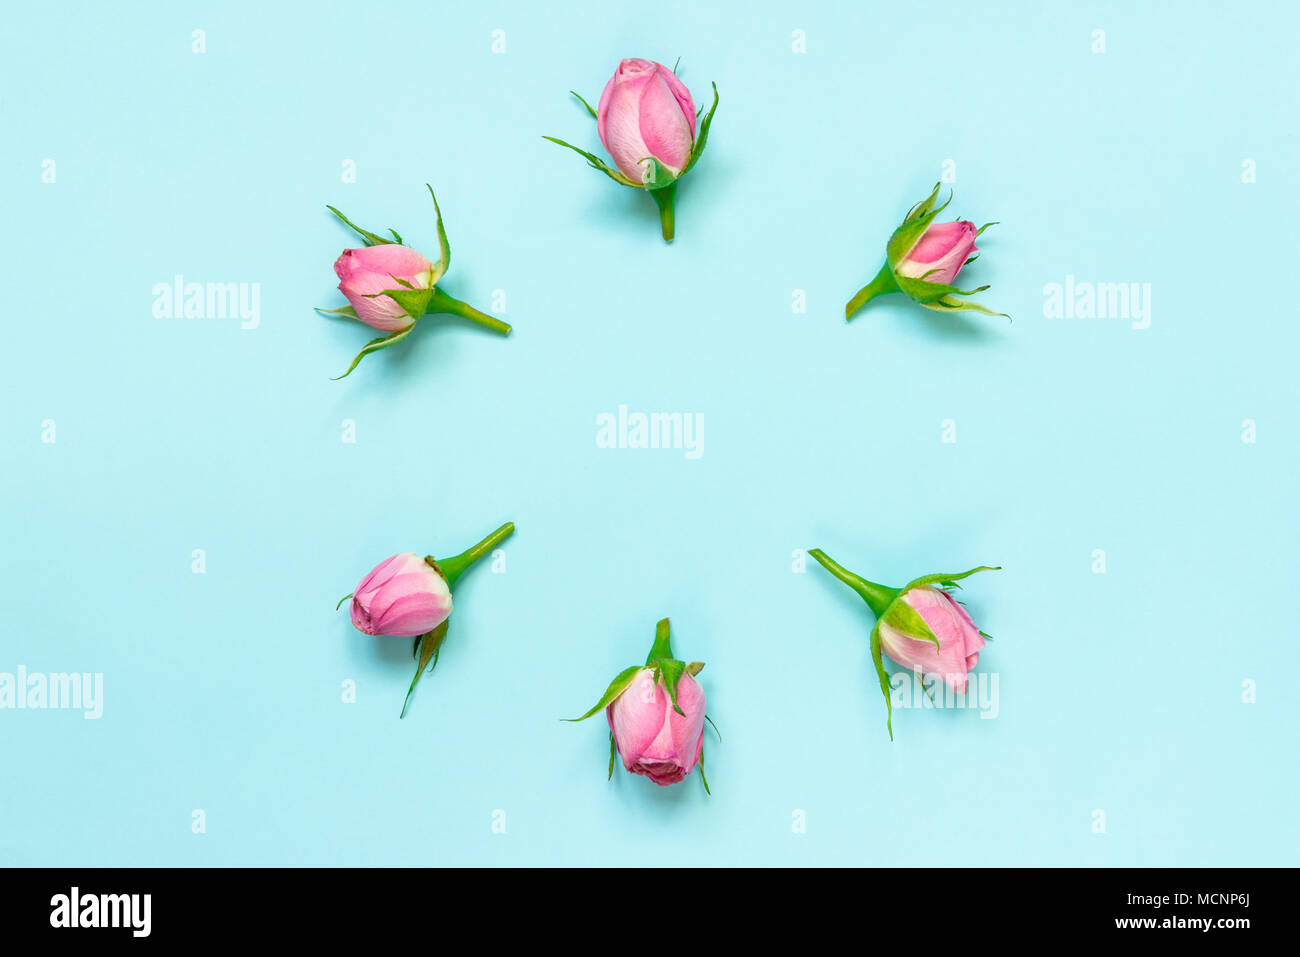 Top view of pink roses arranged in circle over blue background. Abstract floral background. Stock Photo